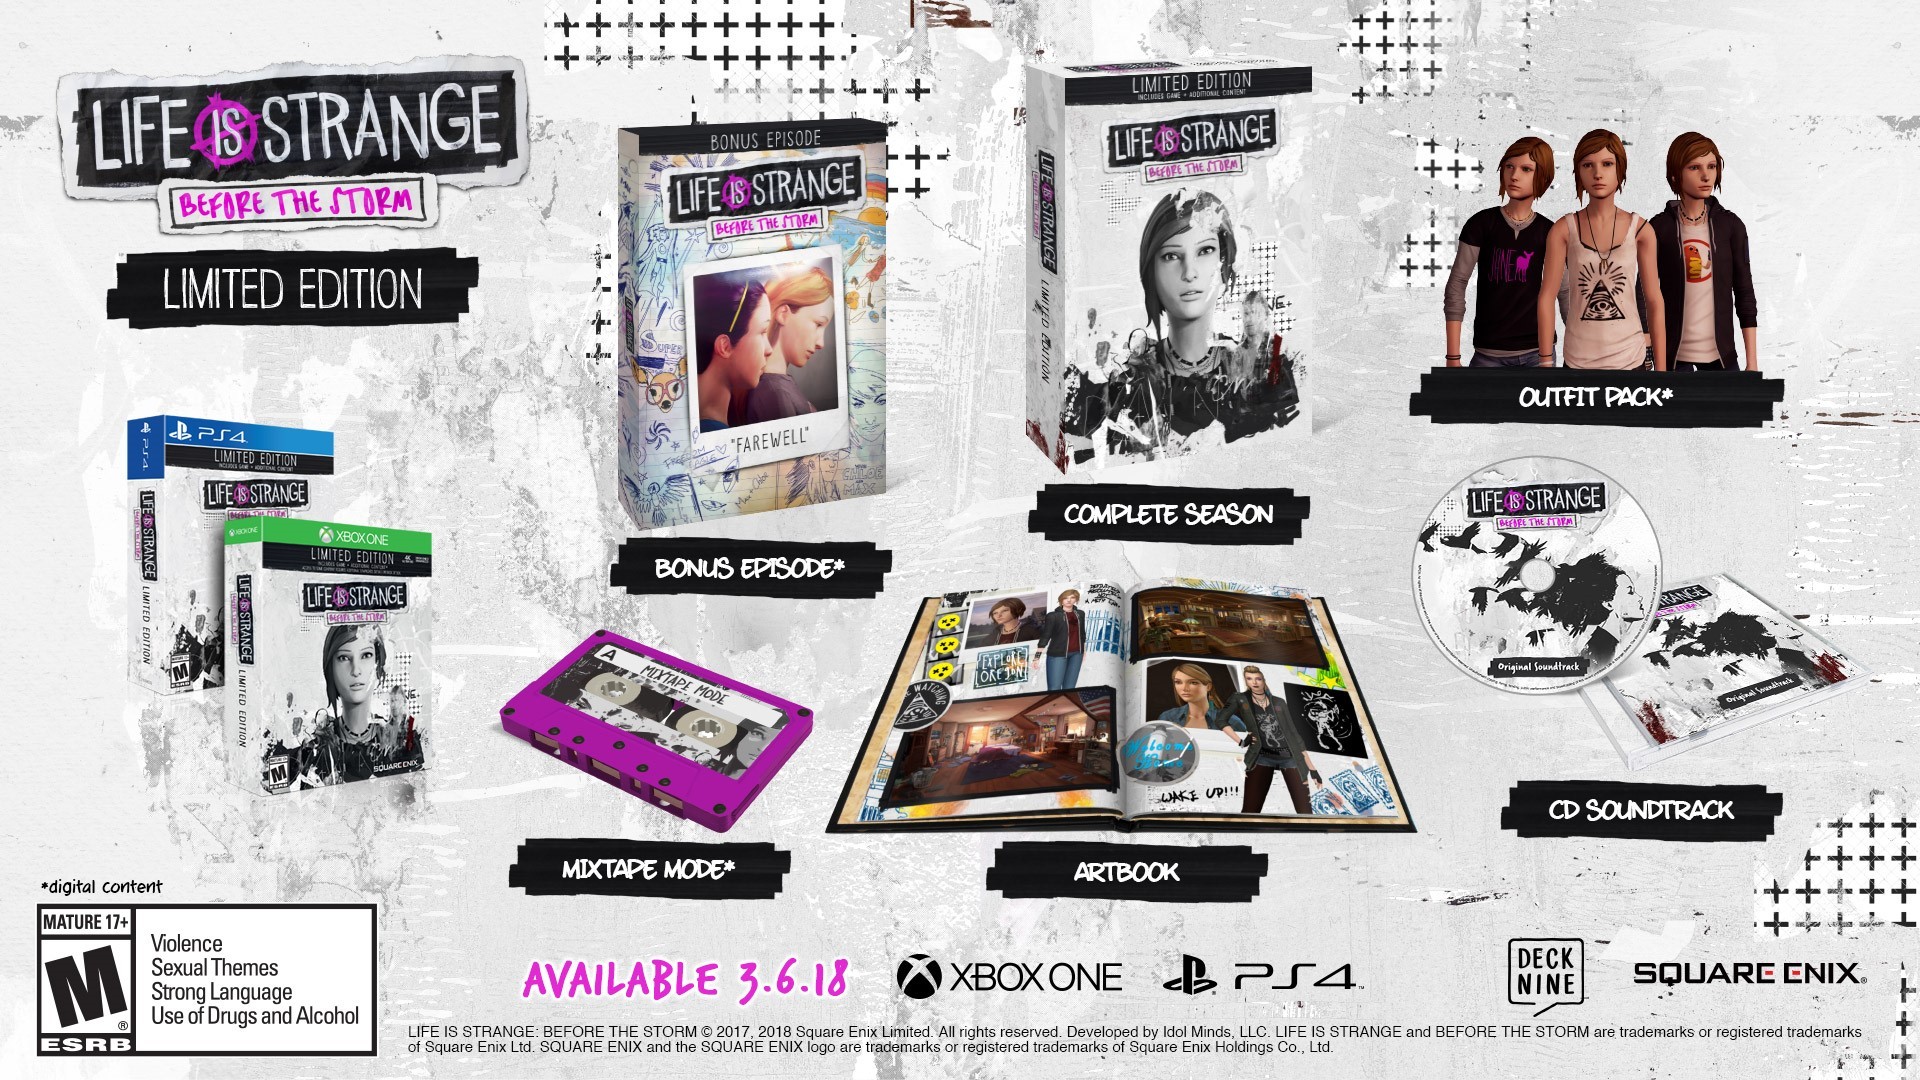 Limited edition перевод. Life is Strange: before the Storm - Farewell. Life is Strange before the Storm Limited Edition. Life is Strange before the Storm Xbox 360. Life is Strange шторм.